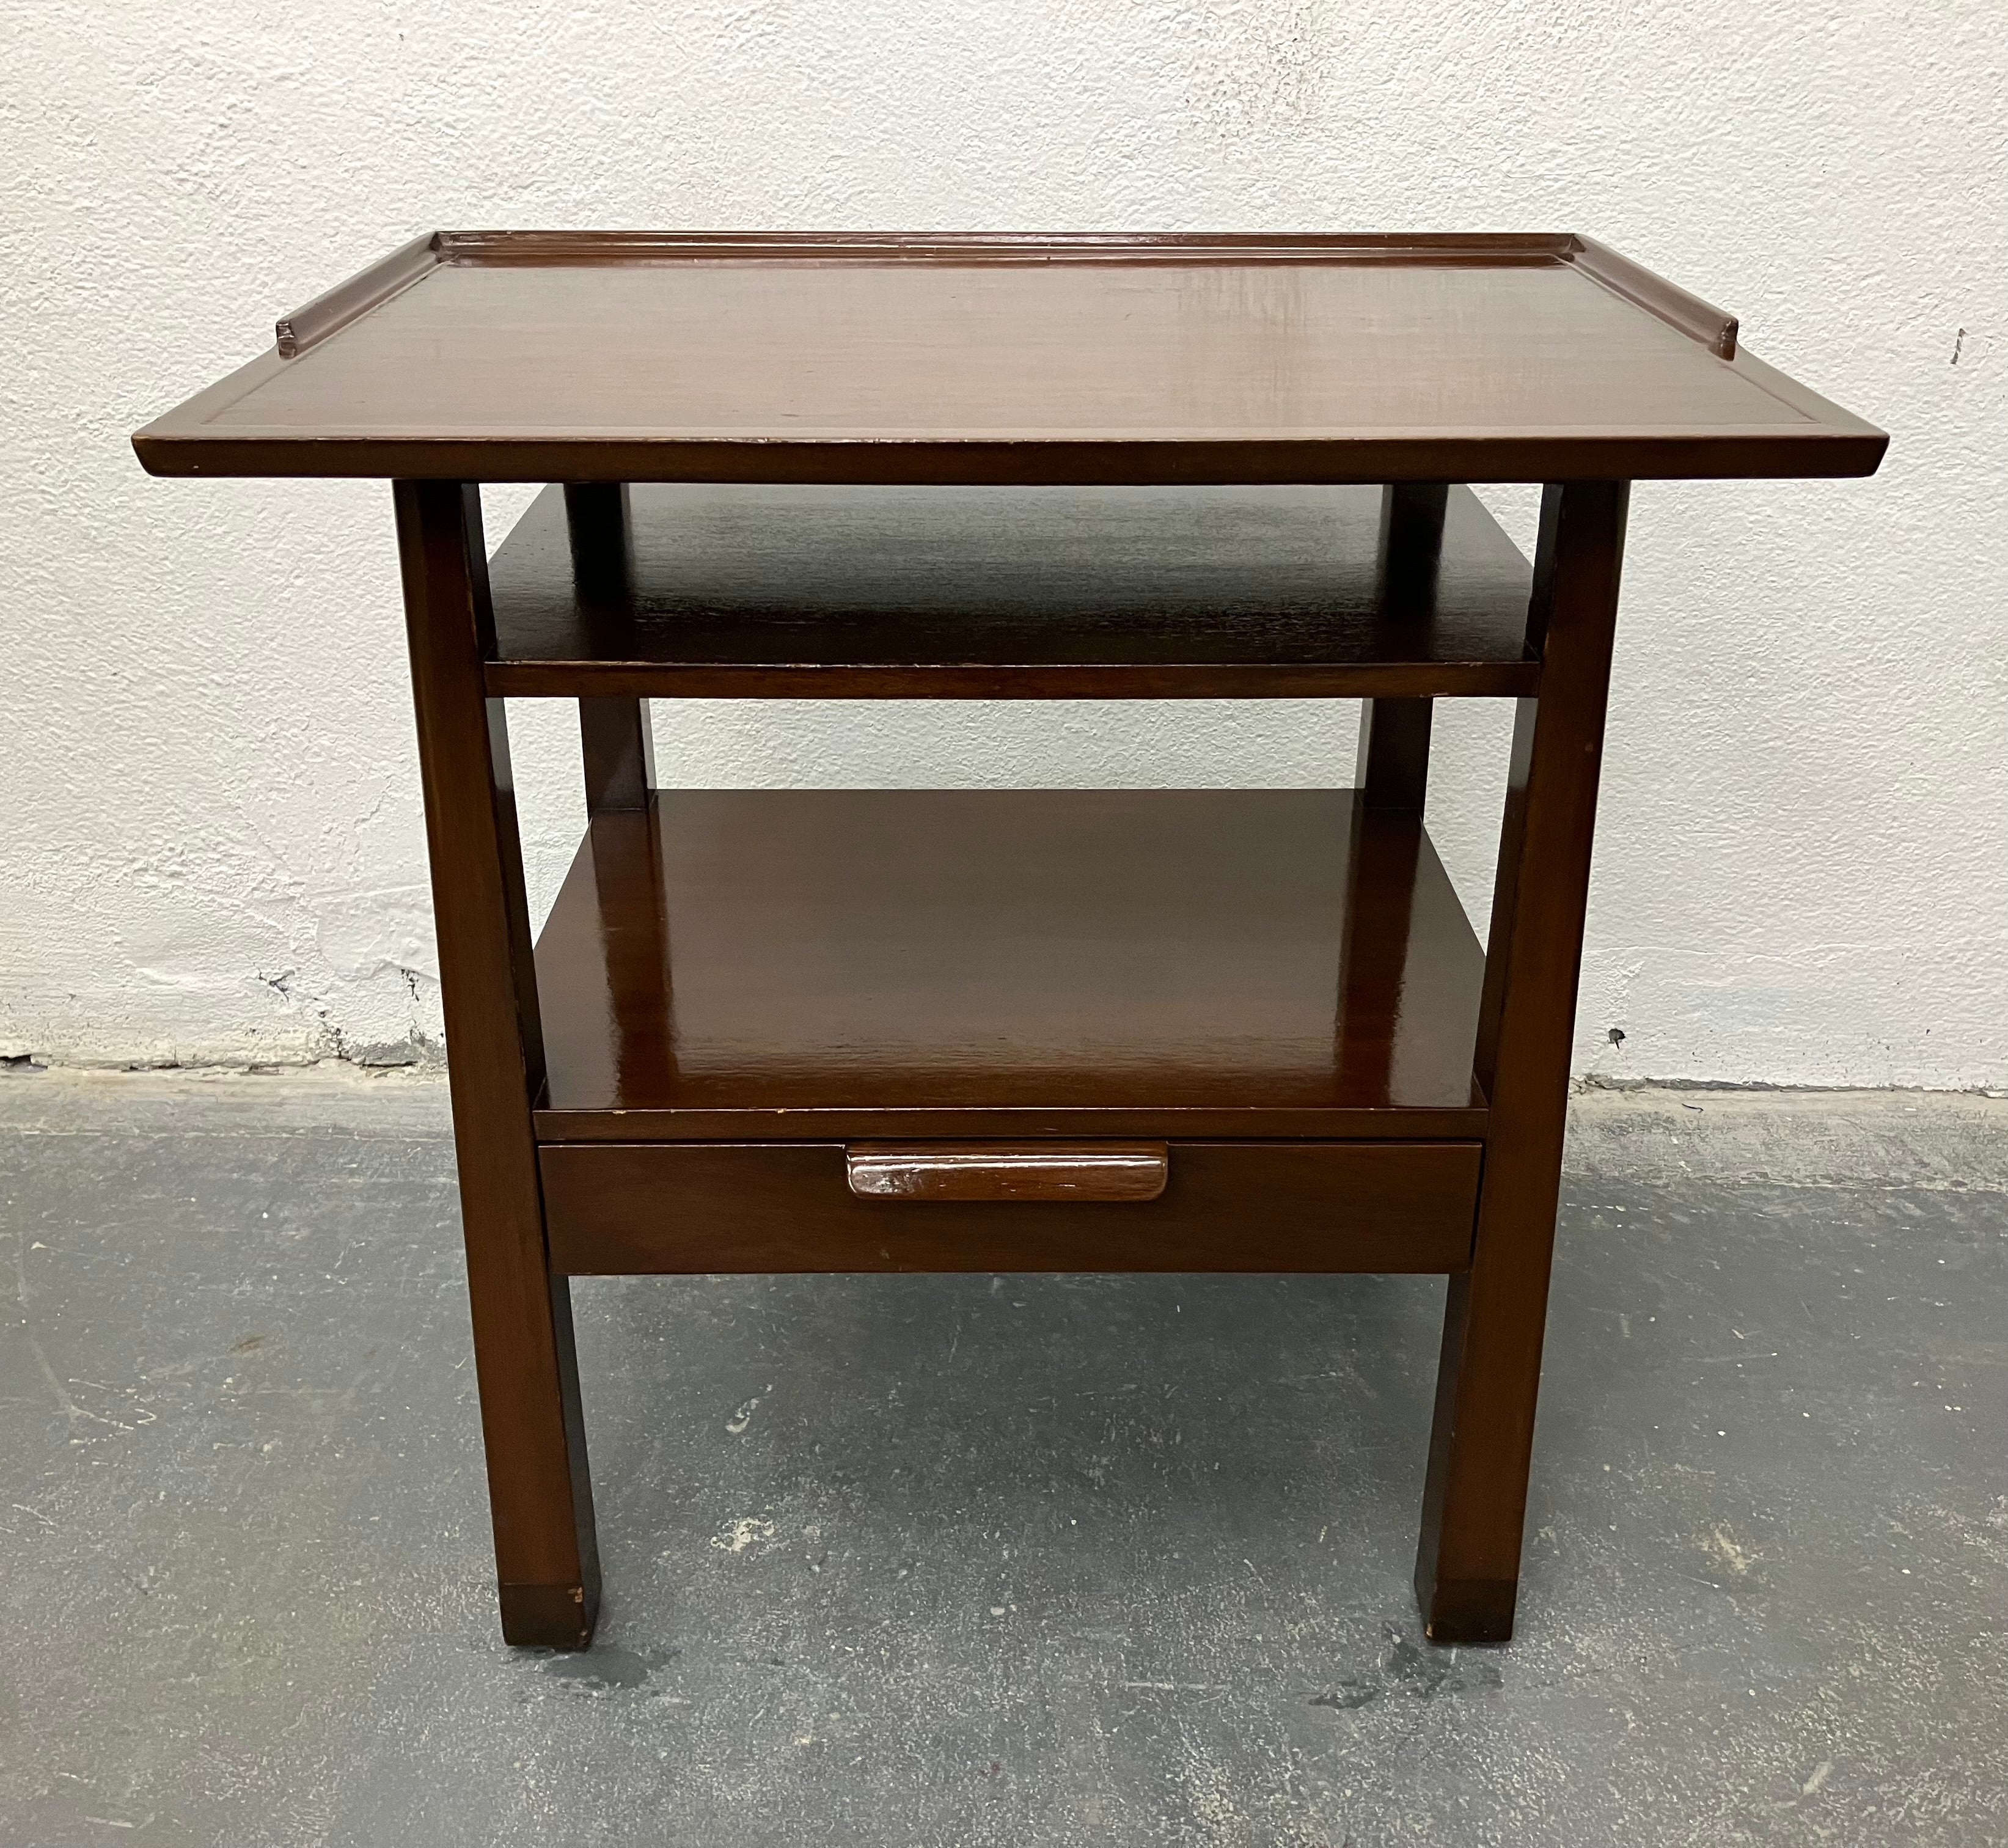 Architectural Edward Wormley design in mahogany with curved bentwood drawer pull, gallery trimmed top, reverse leg taper, and leather capped feet. 

An interesting modern update on an Arts & Crafts form. Works equally well as side or occasional